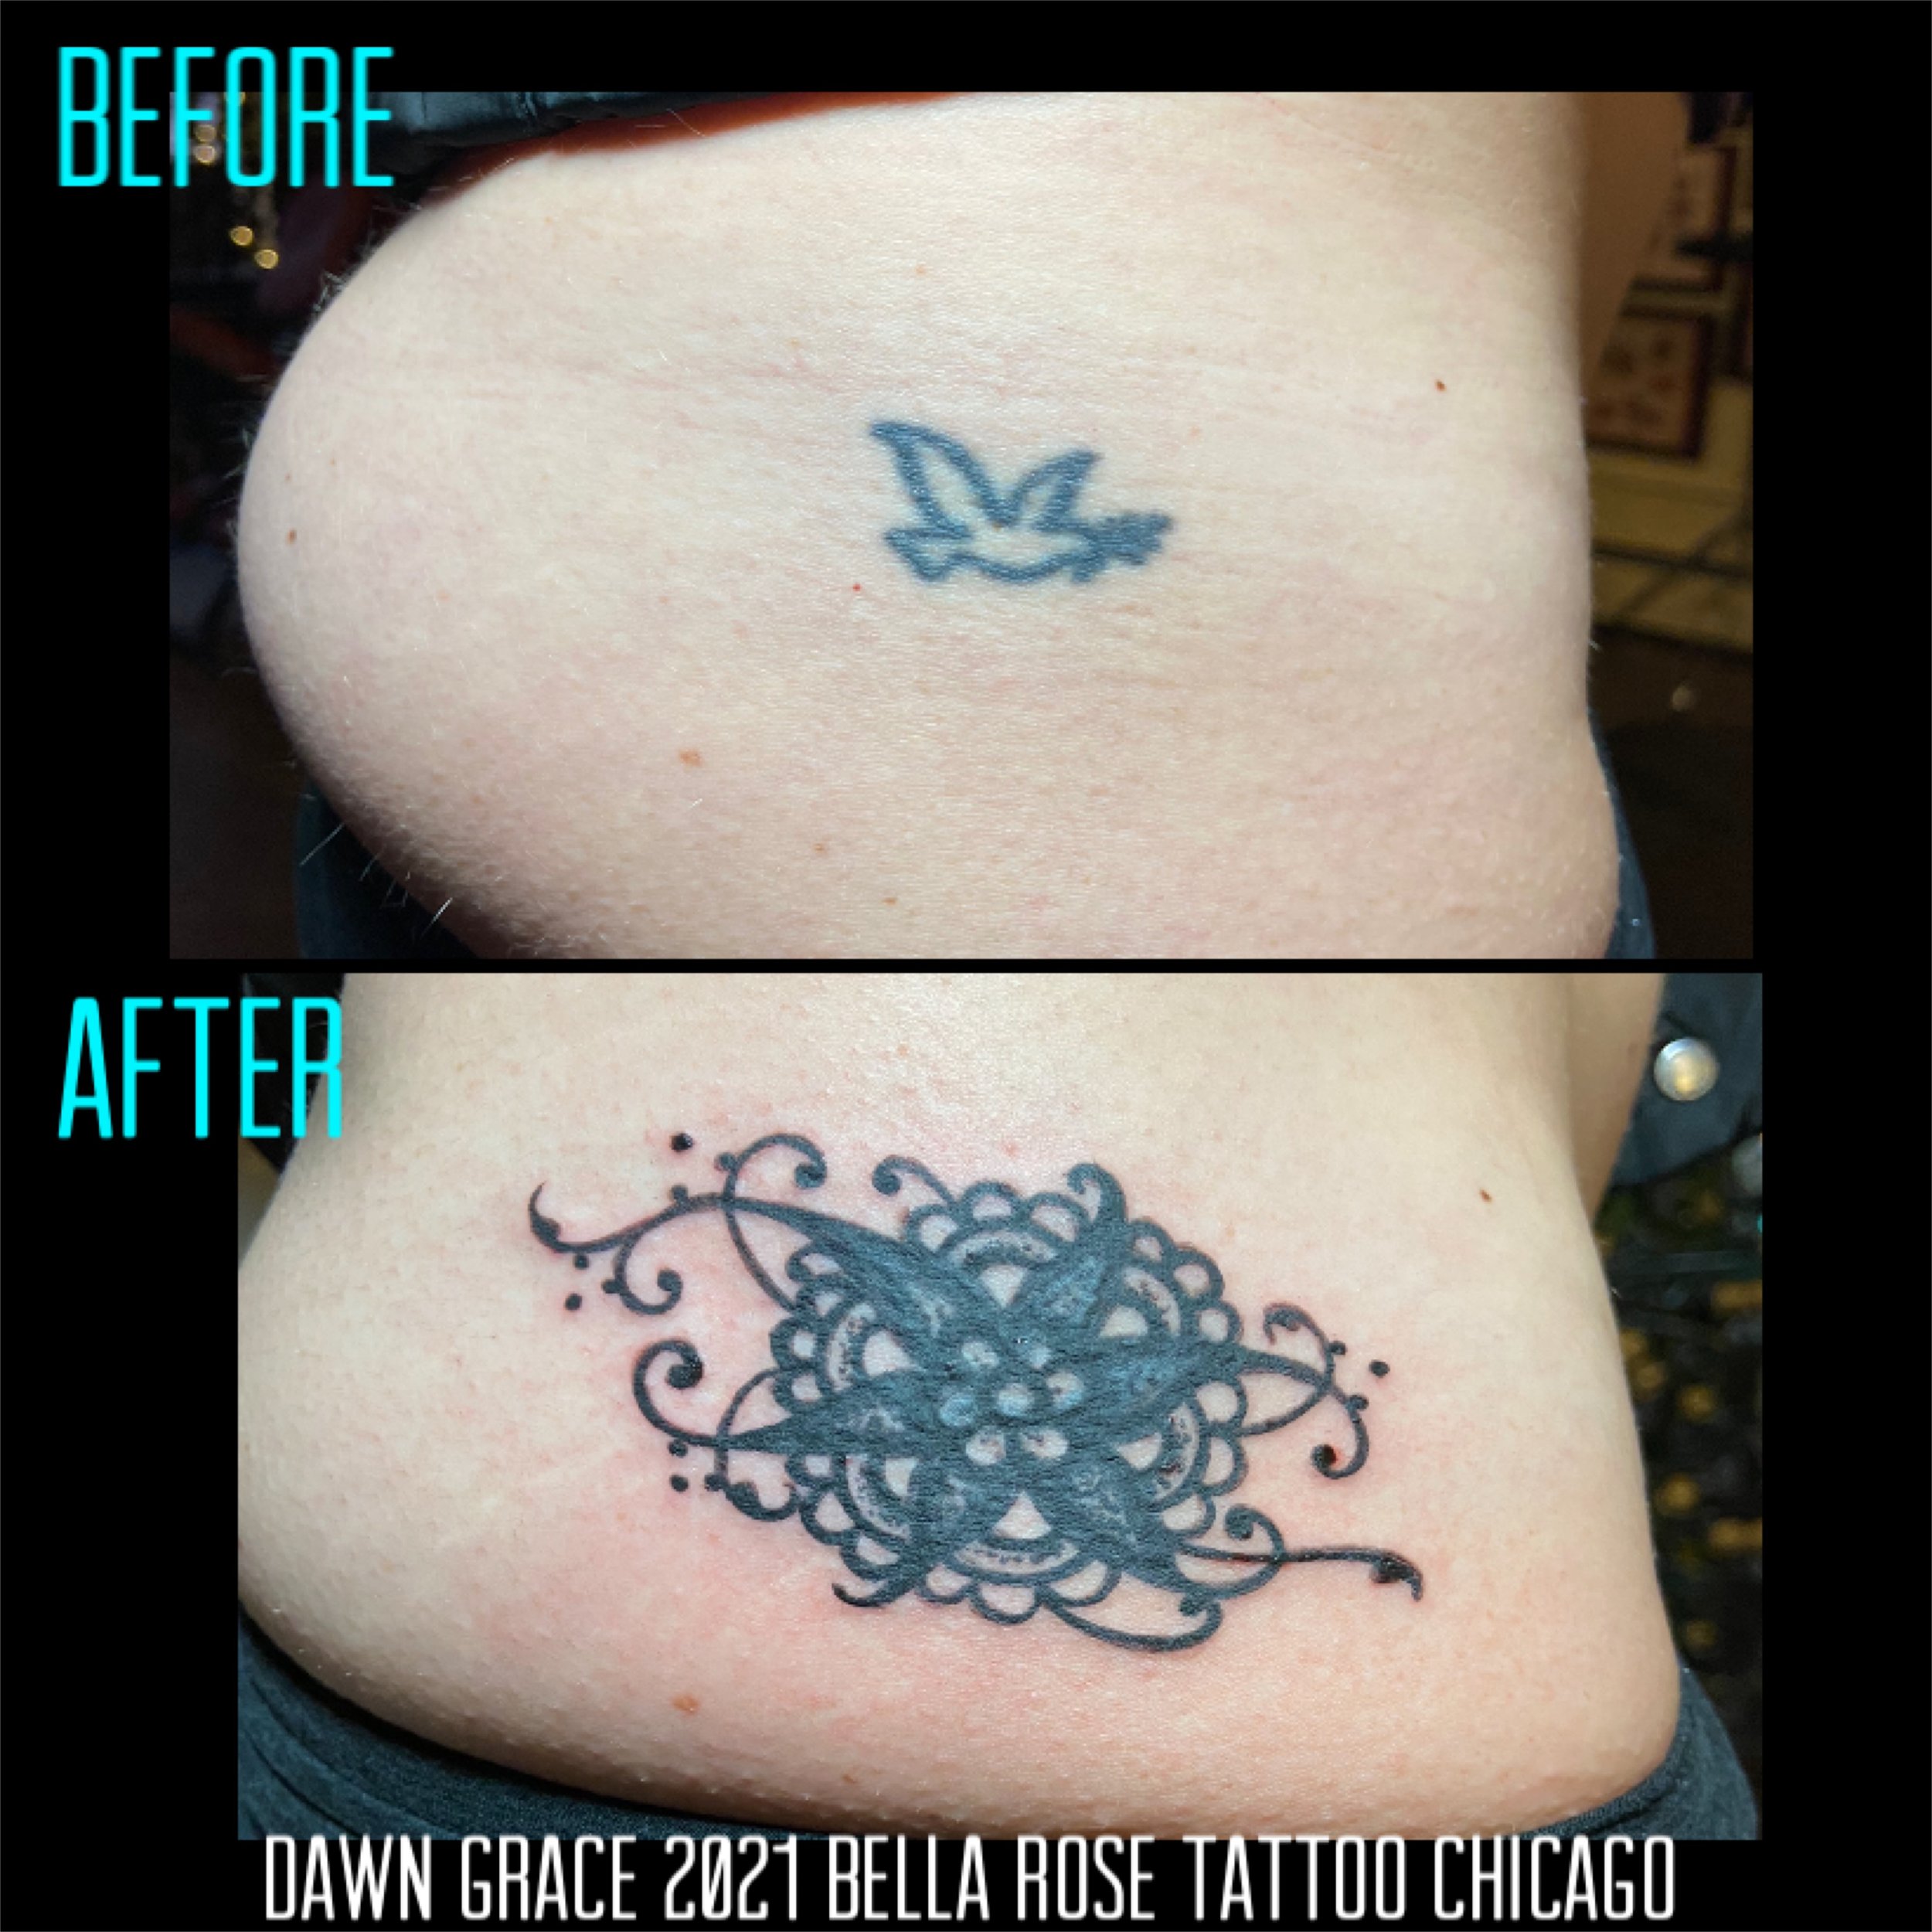 Kevin Owings  Tattoo cover up done by Kevin Owings of Mind Crusher Tattoo  6705 n Clark St chicago 562 484 8165 coverupstattoos tattoo  mindcrushertattoo kevinowings 6705nclarkst  Facebook